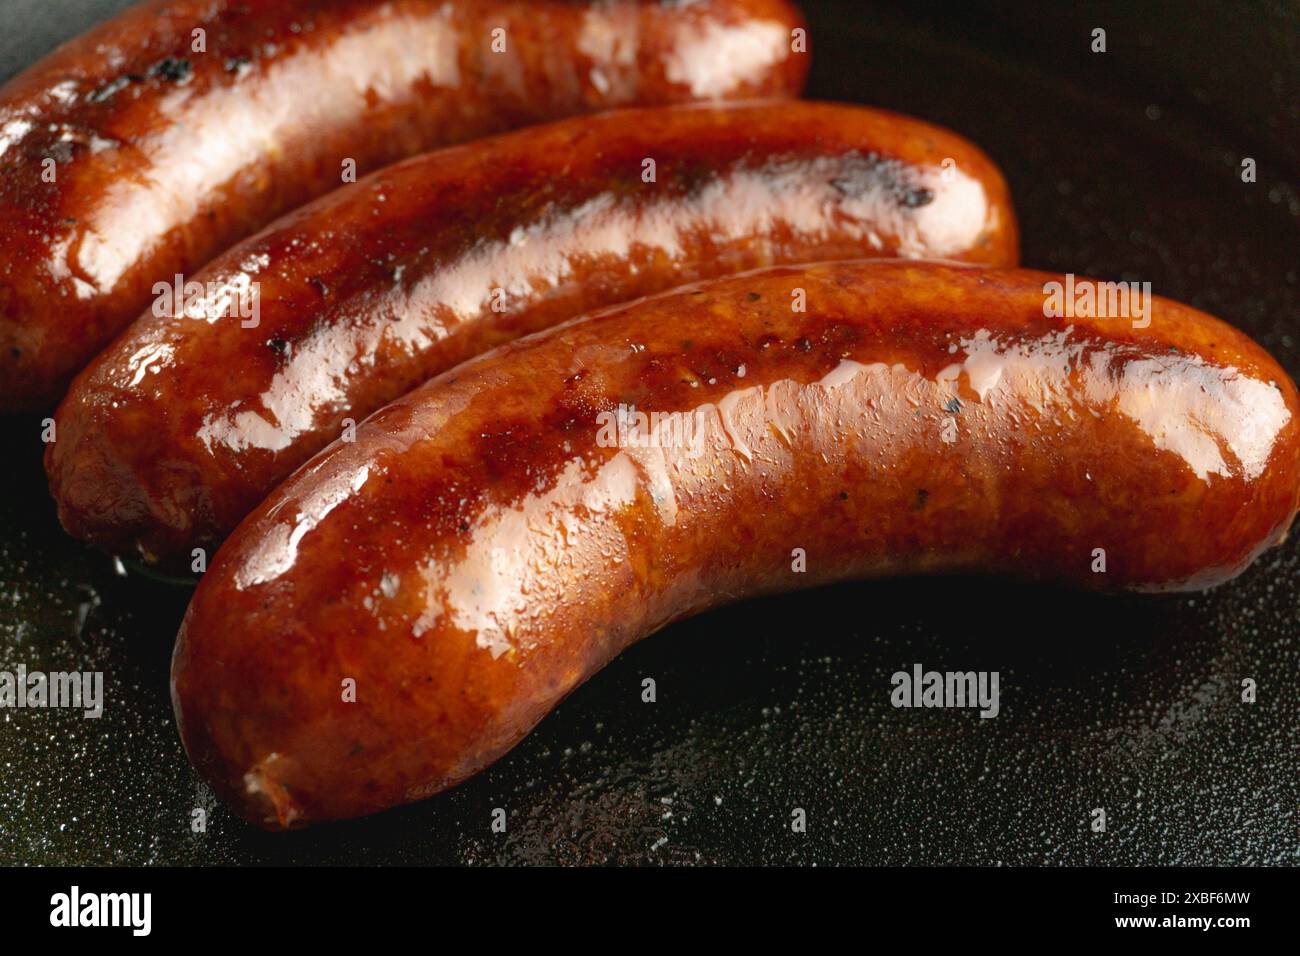 cured red juicy smoke beef sausage sear on cast iron skillet Stock Photo